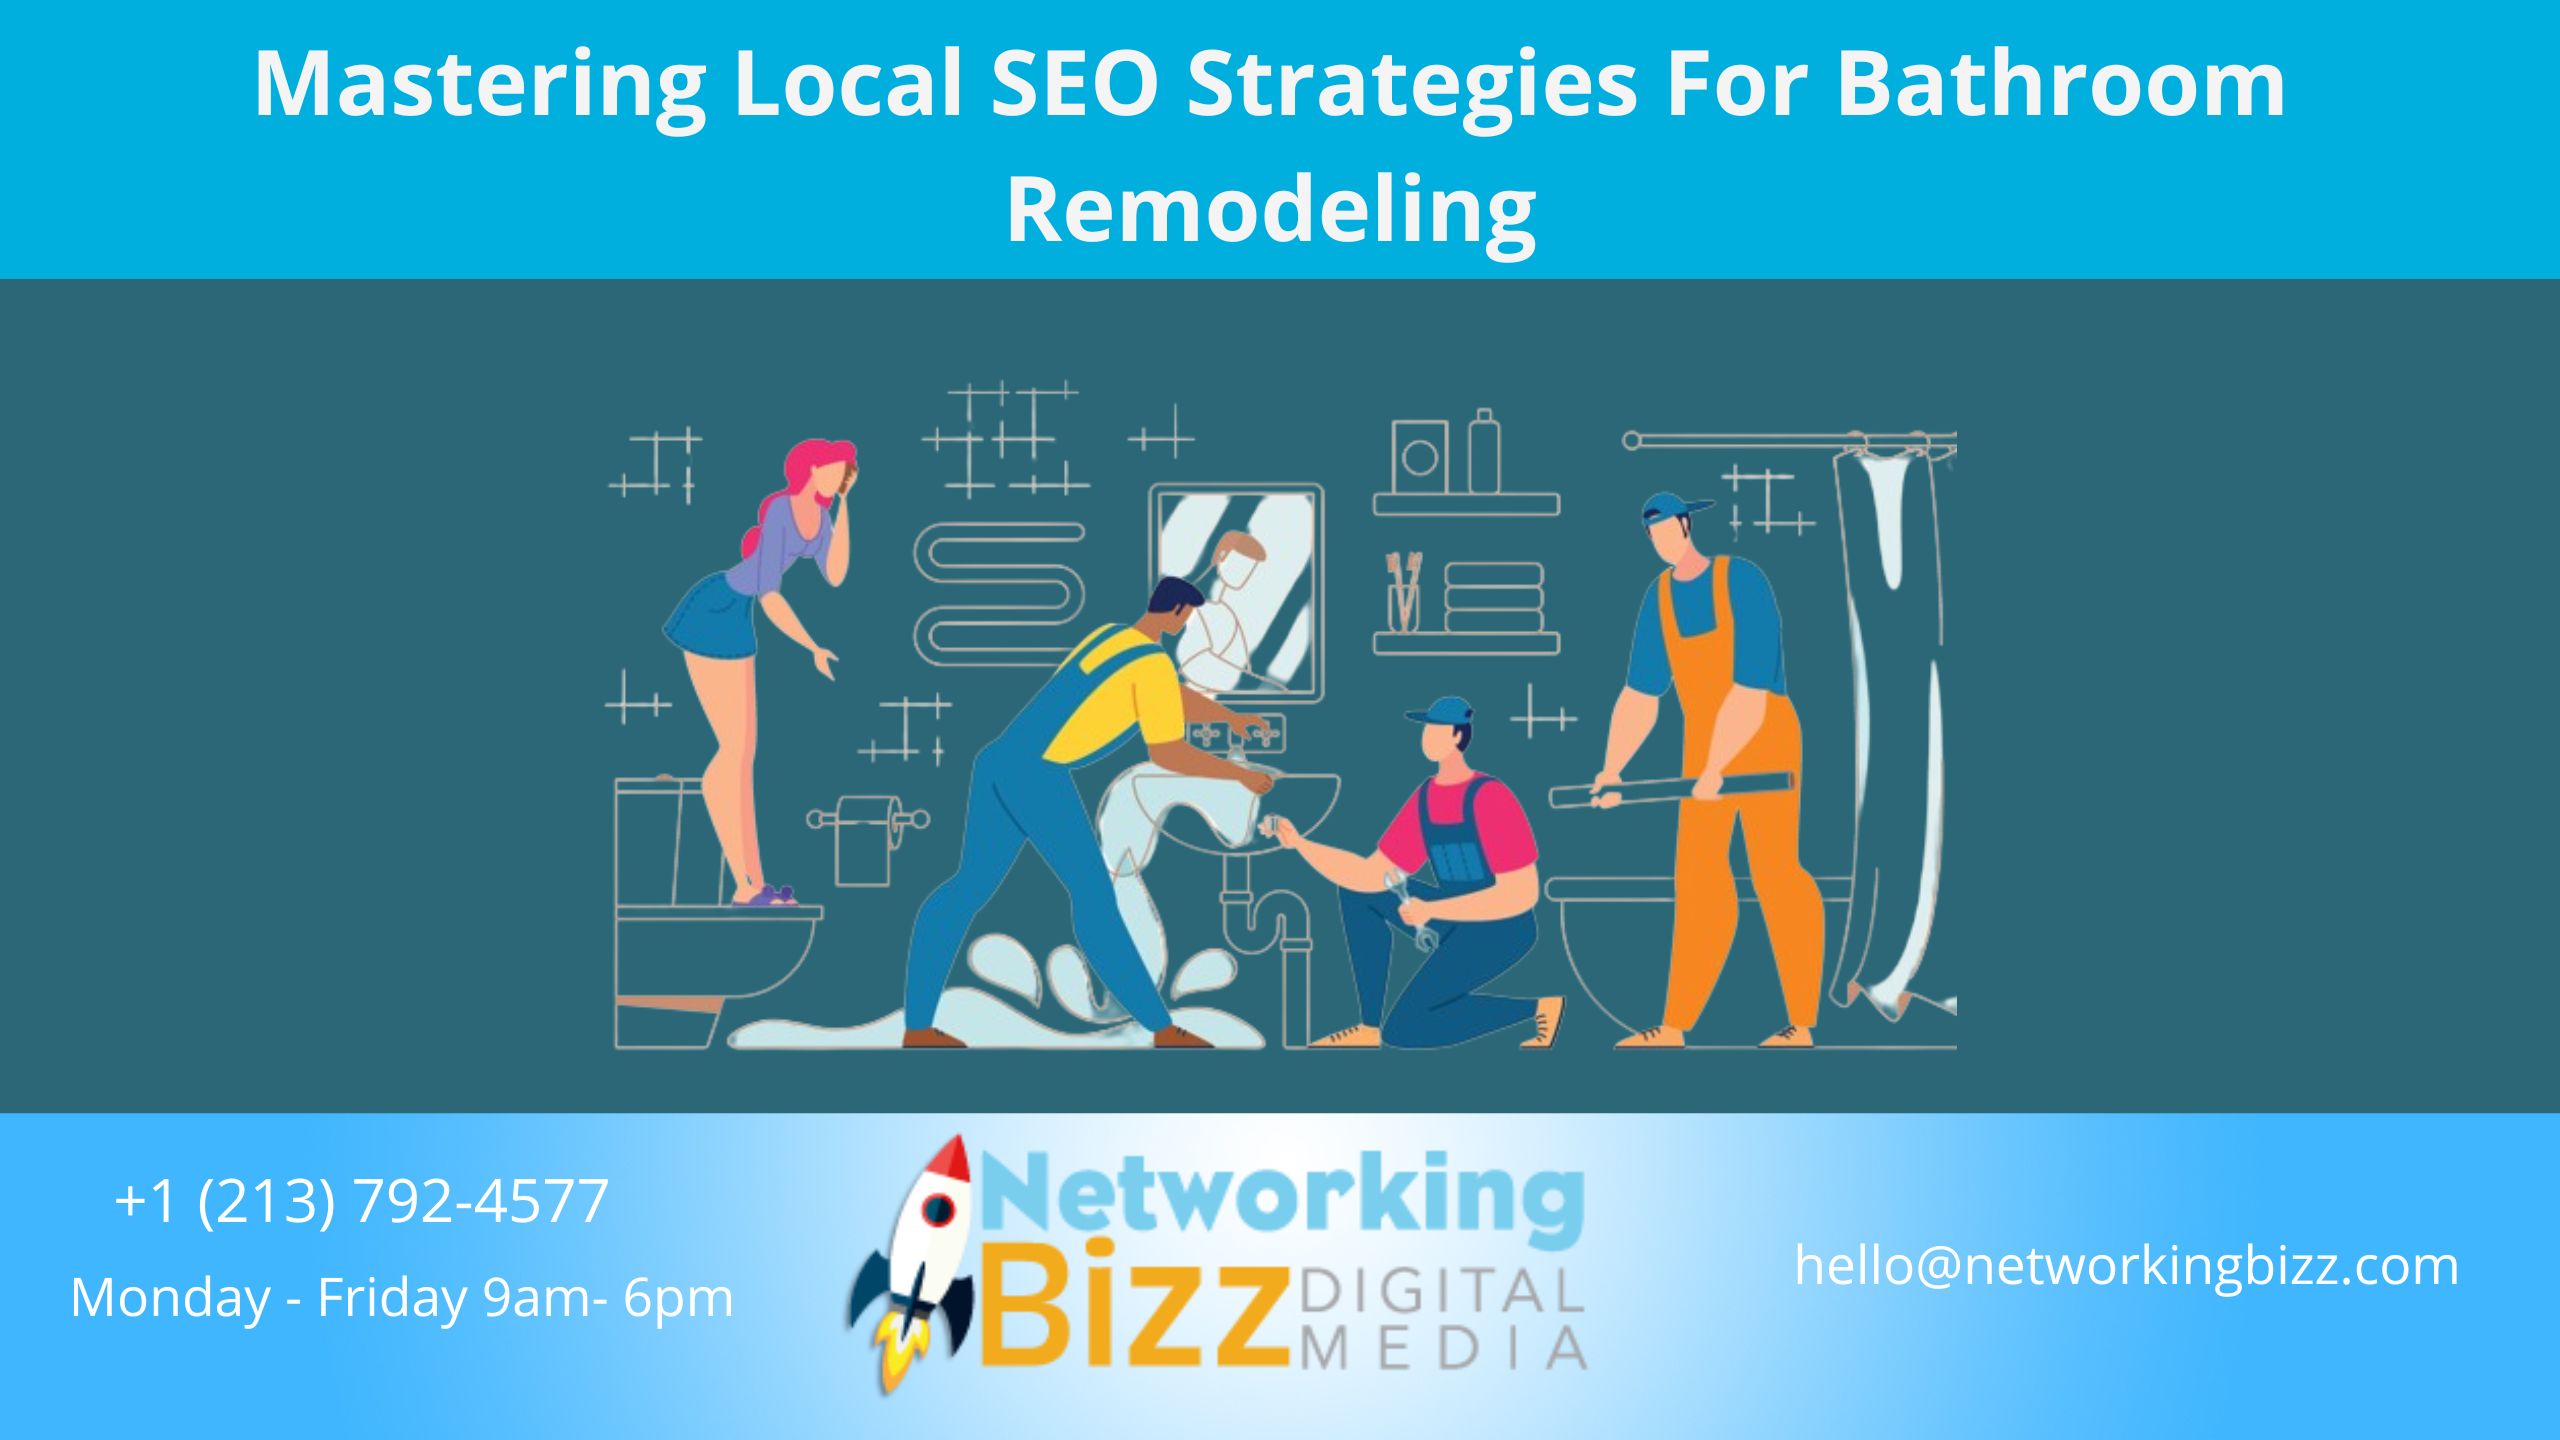 Mastering Local SEO Strategies For Bathroom Remodeling